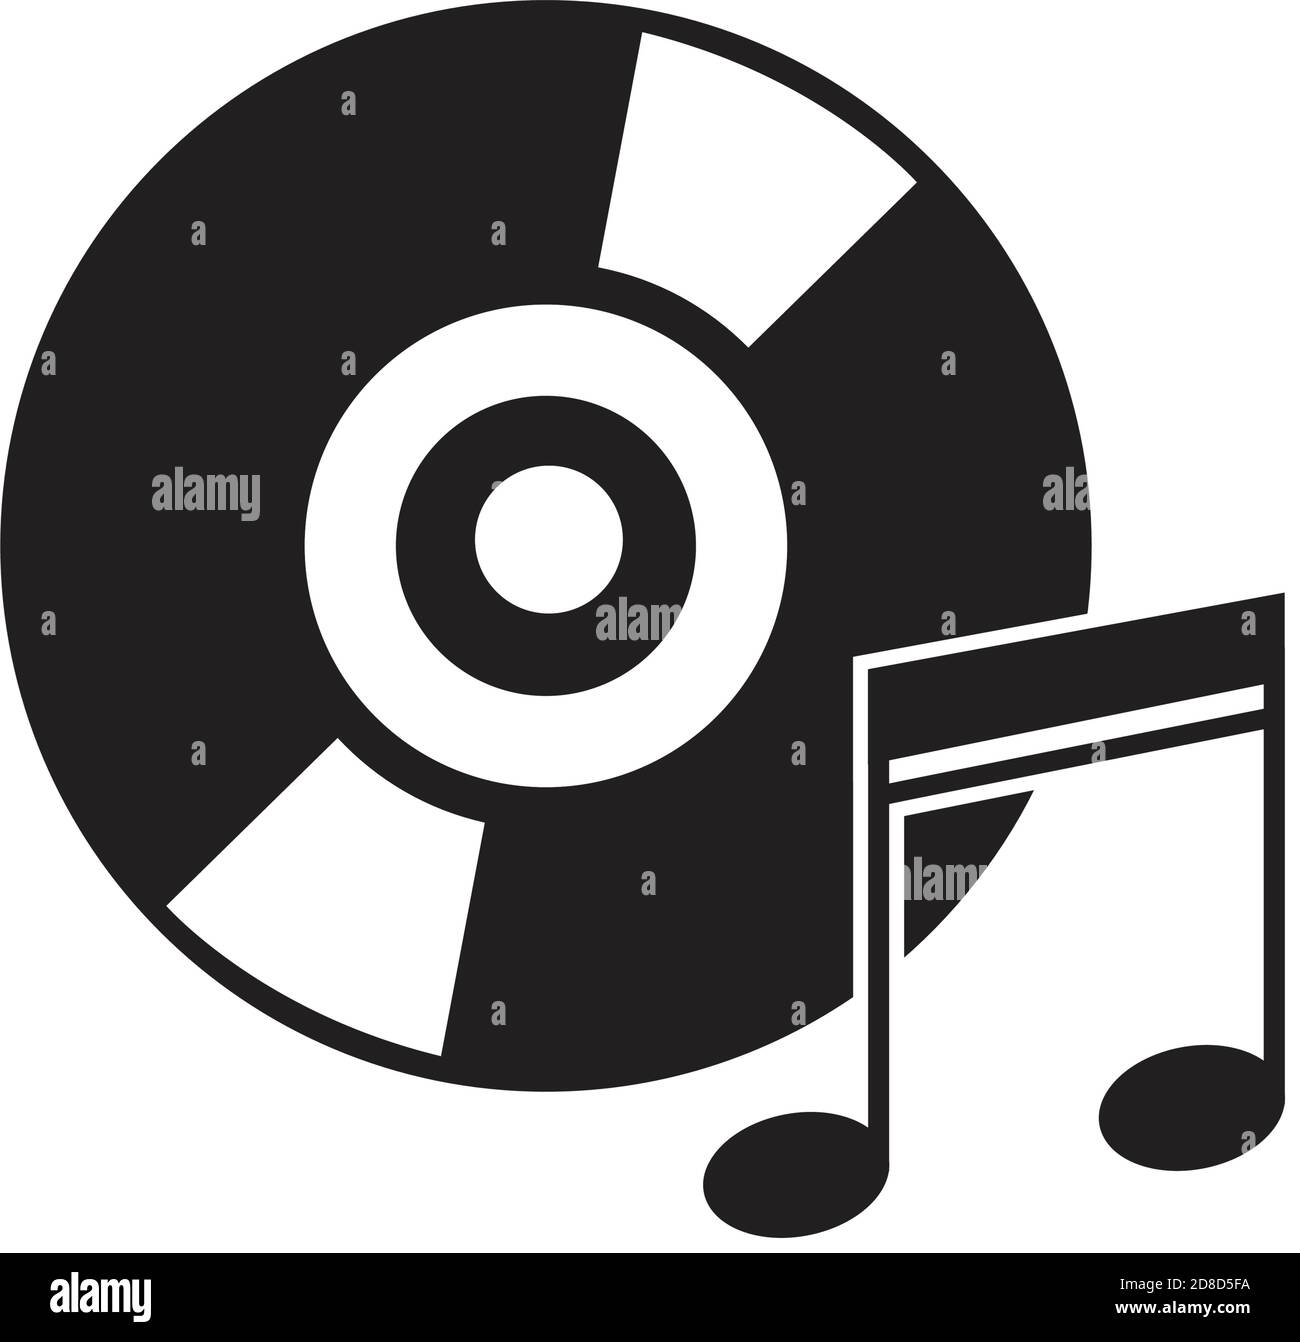 Black musical long play album disc size stereo sound record isolated on white background Stock Vector